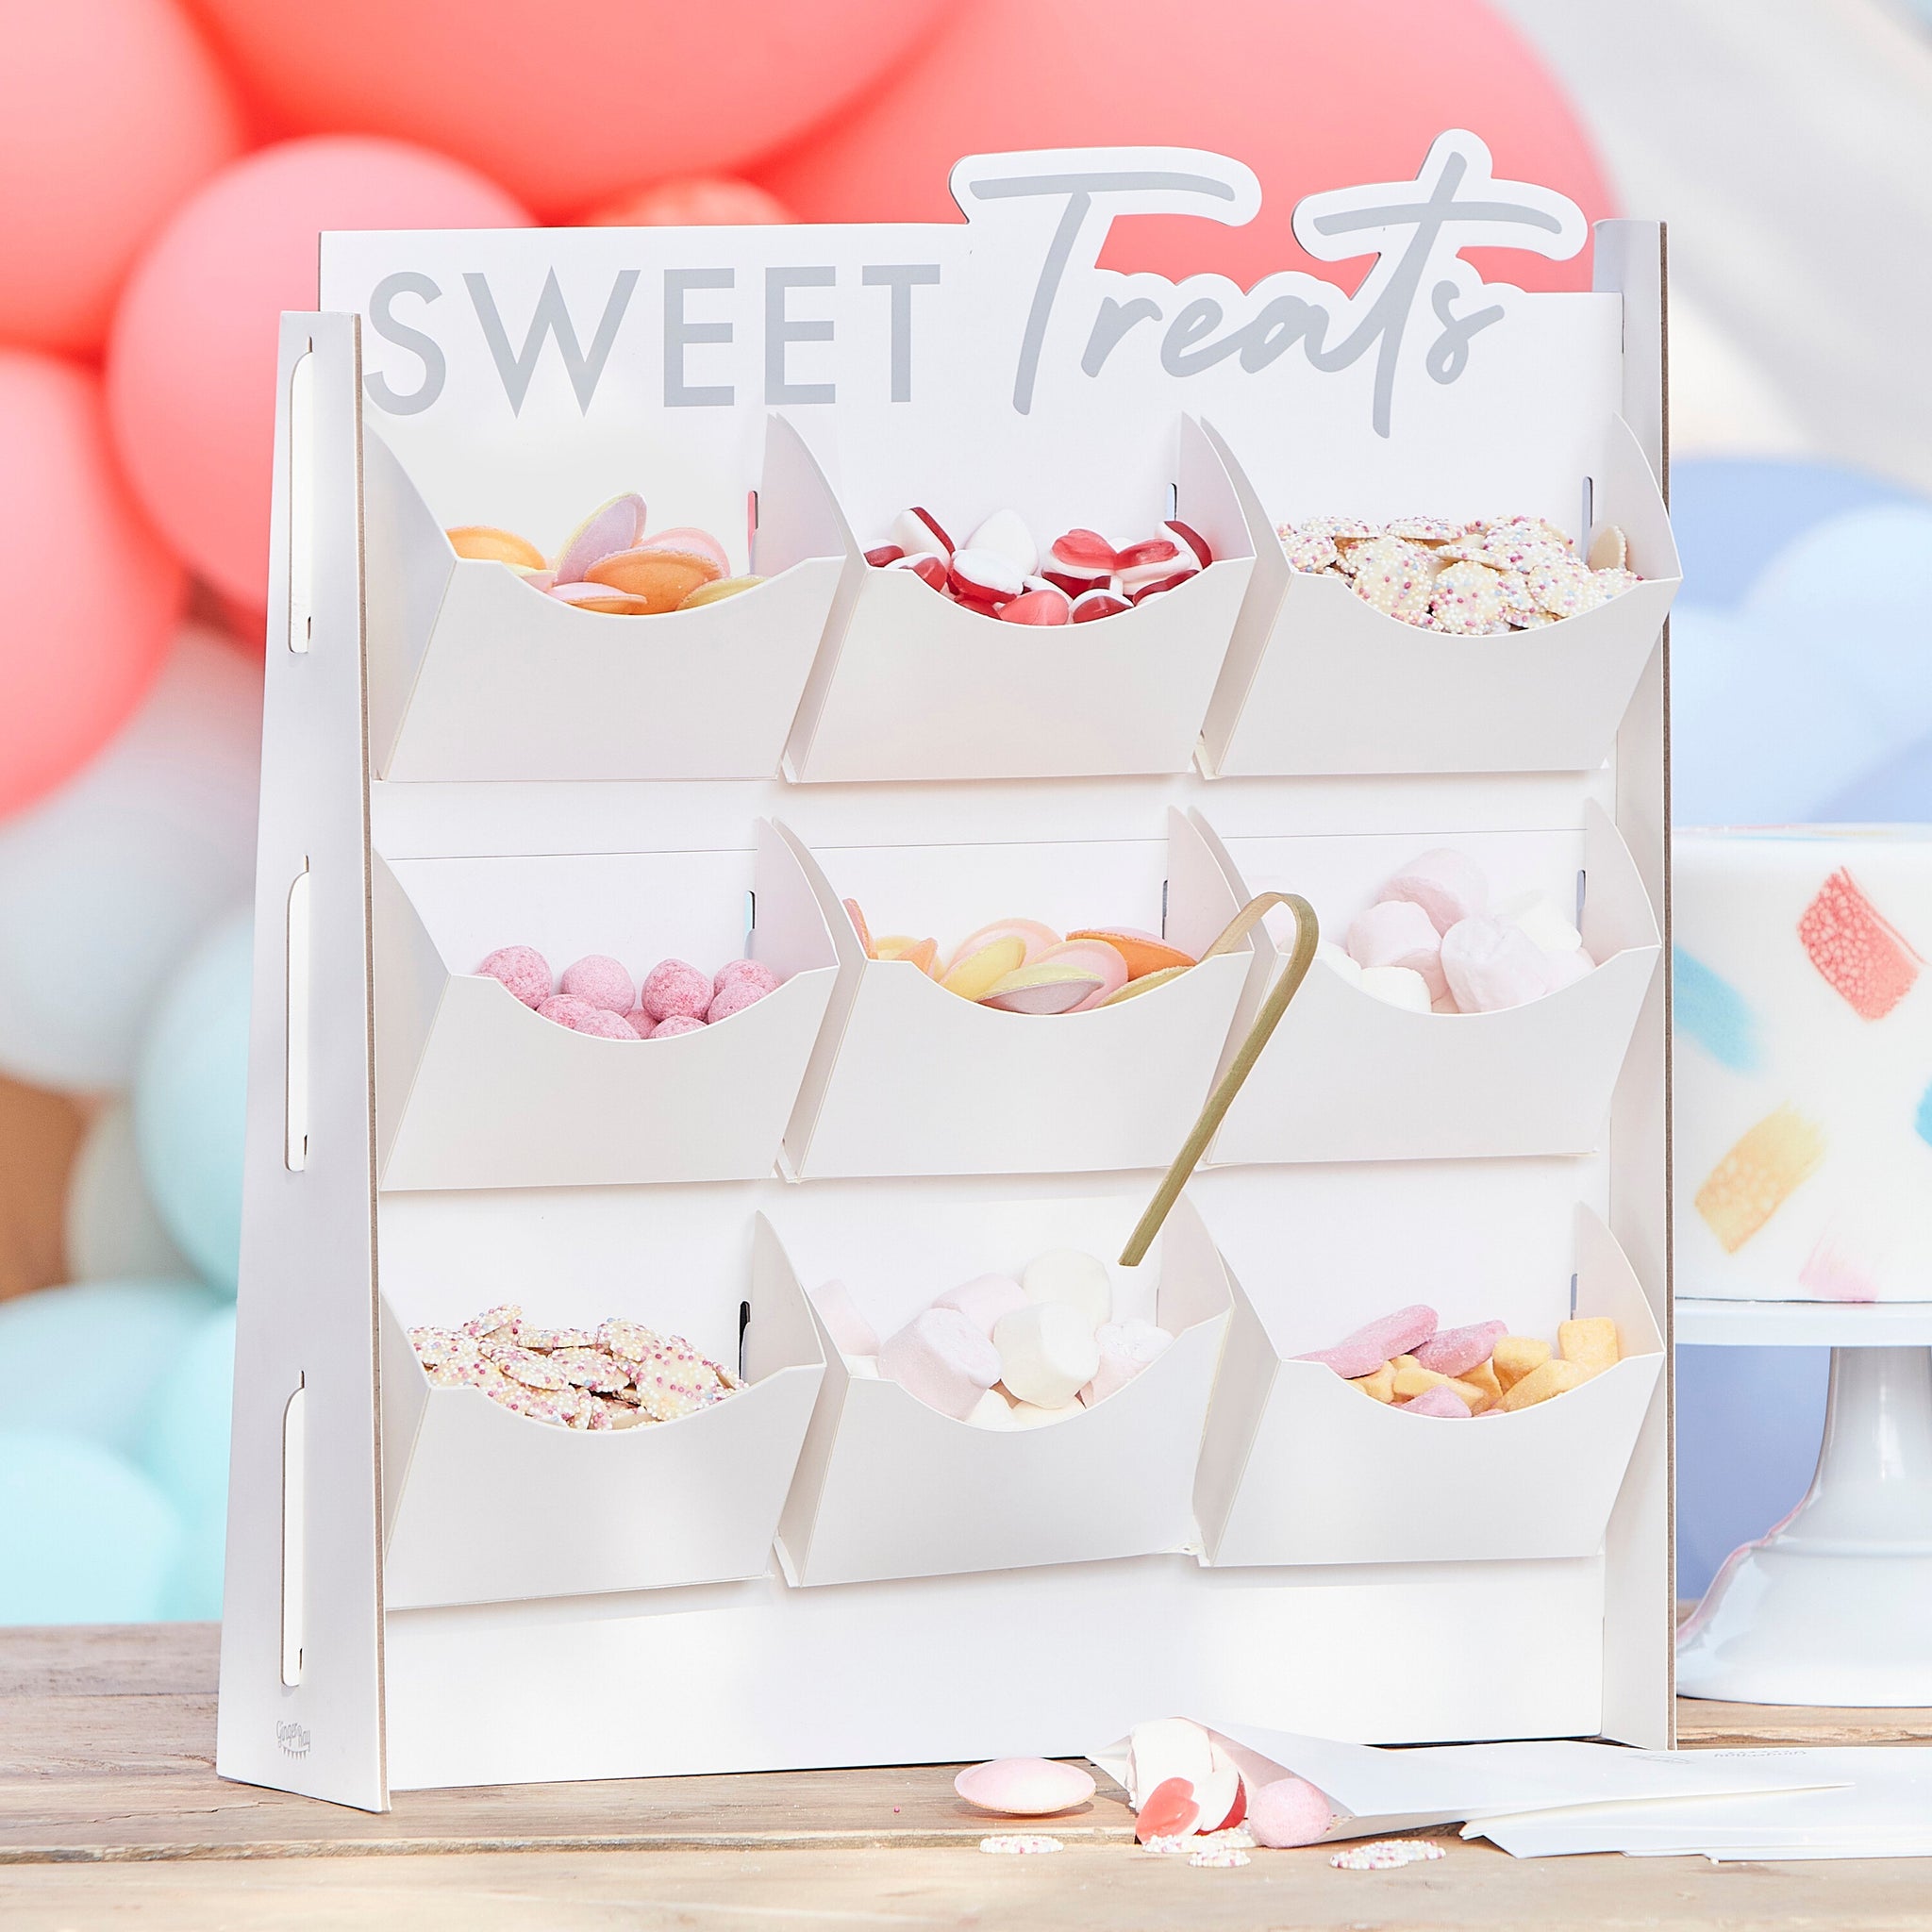 Sweet Treat Stand in heavy card with 9 pockets for small sweets pack includes 10 treat bags, a great addition to your treat table at any occasion.